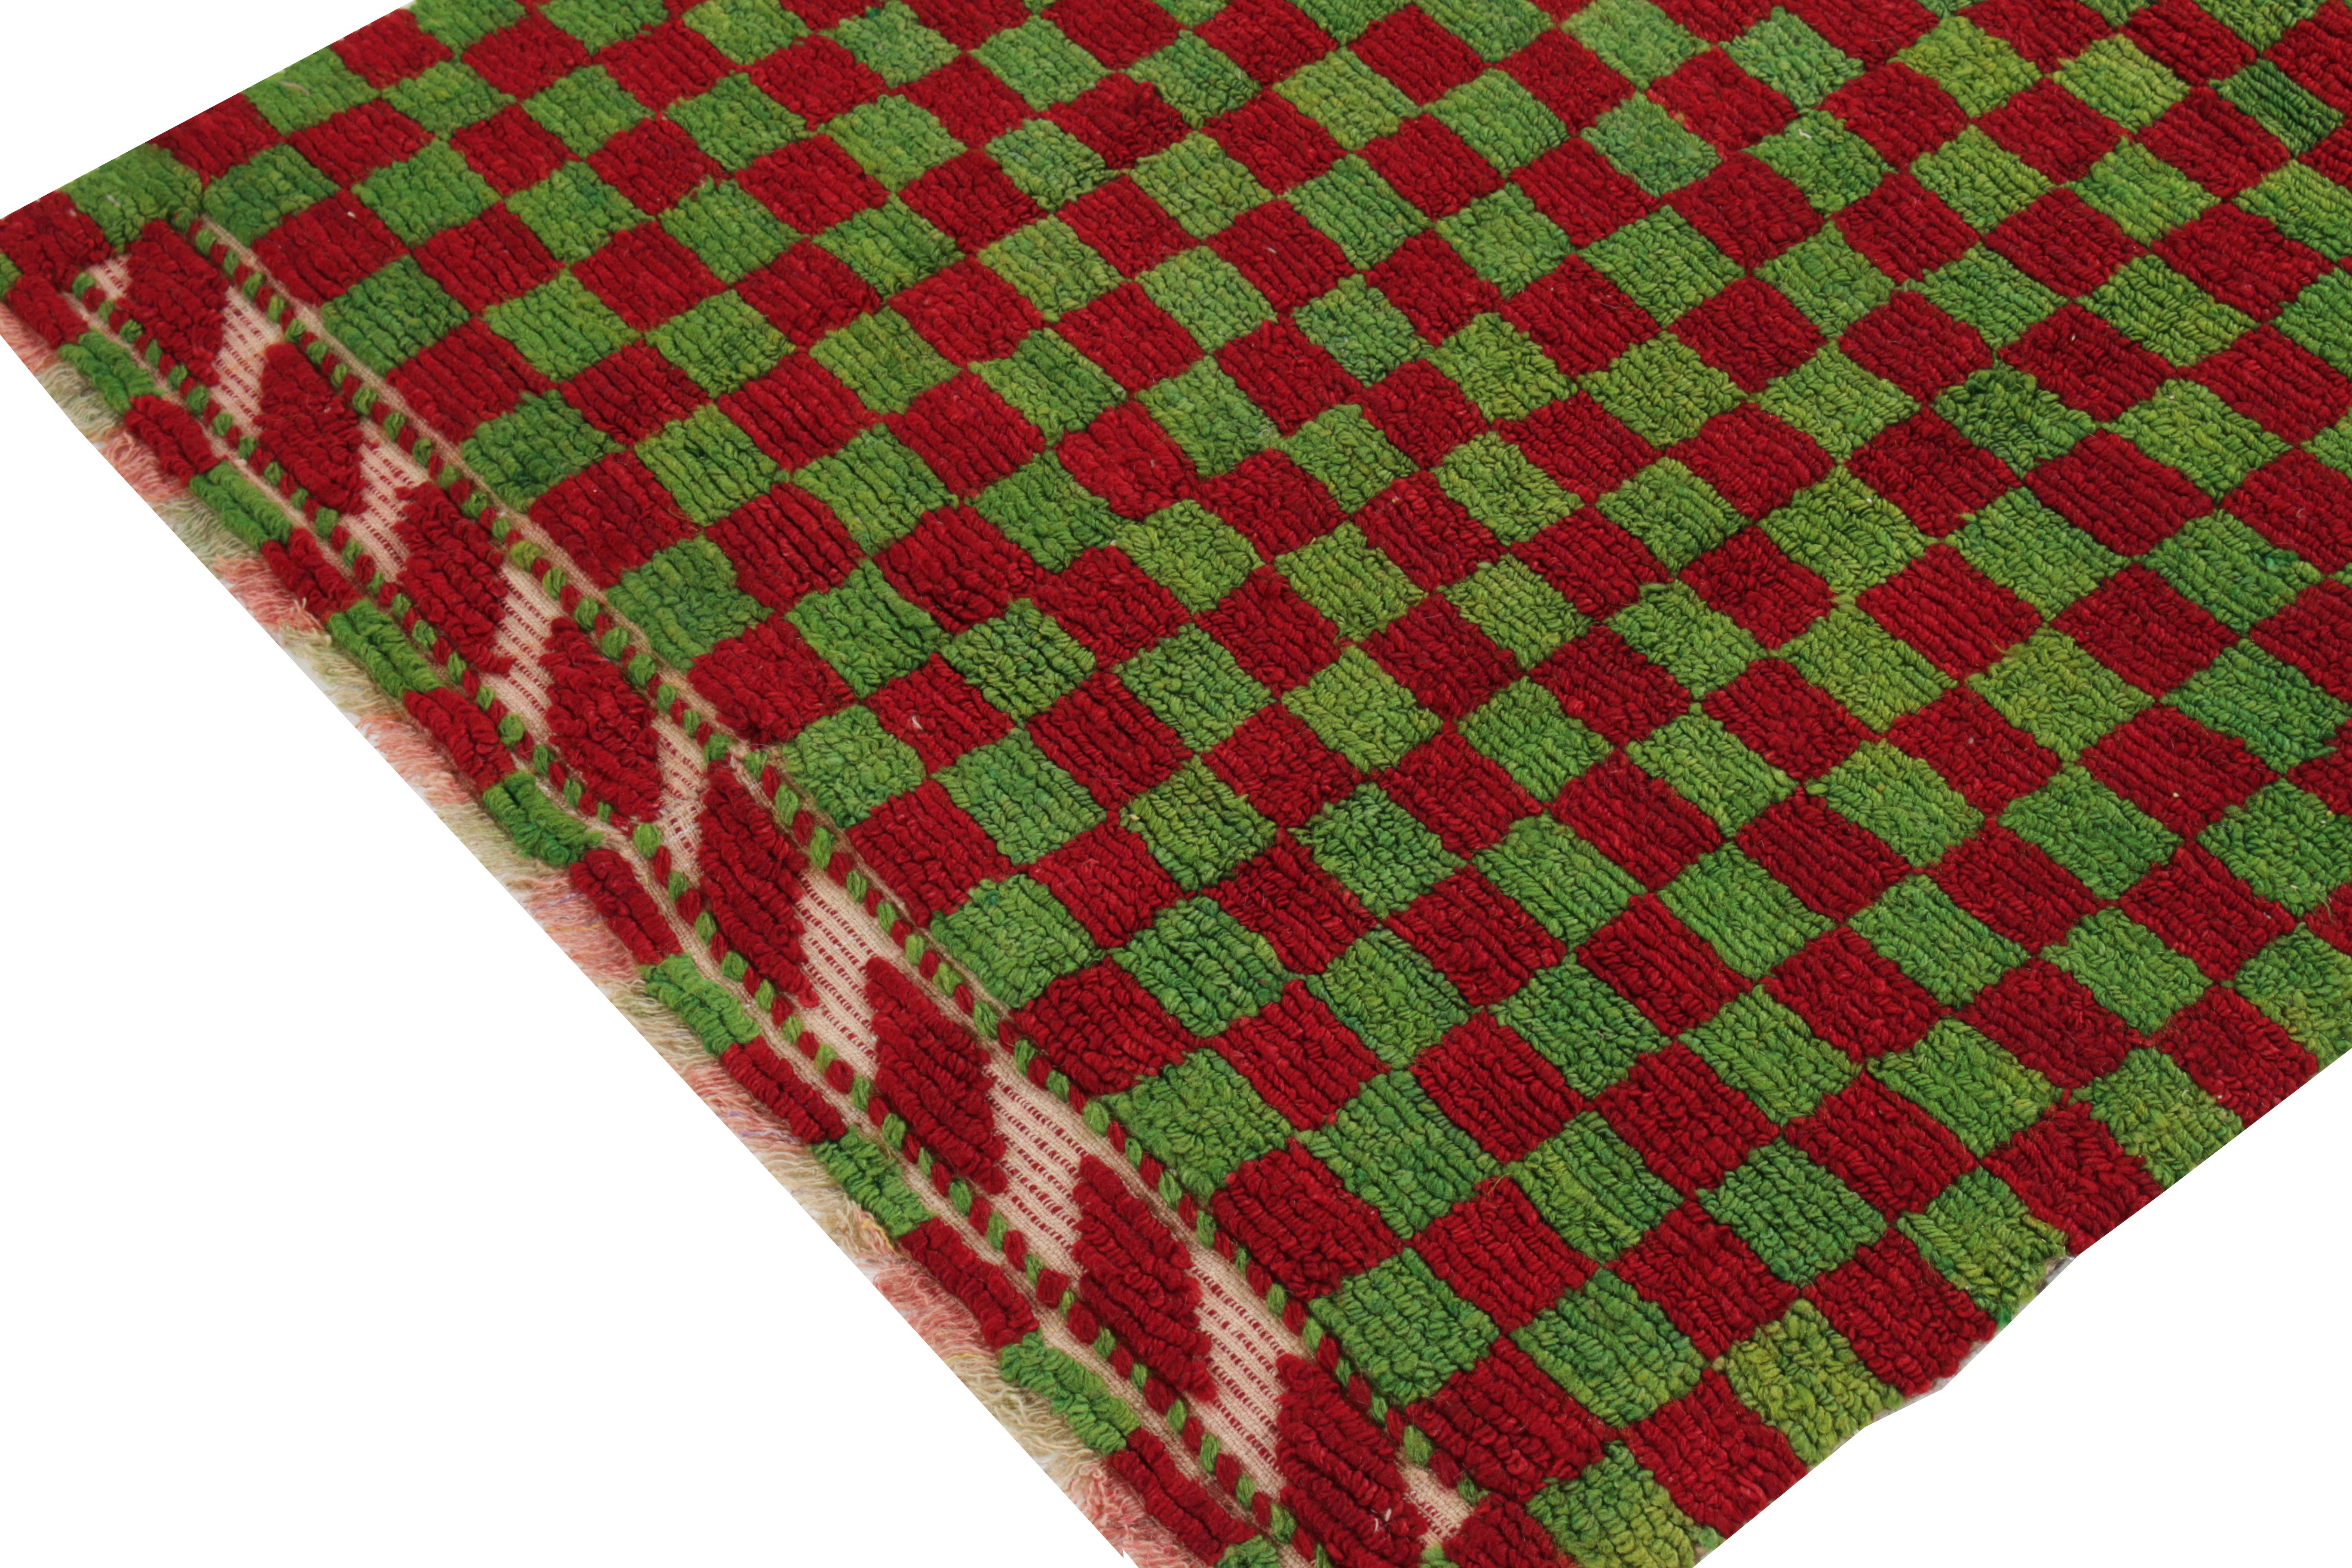 Turkish 1950s Vintage Tulu Rug in Red, Green Chessboard Geometric Pattern by Rug & Kilim For Sale